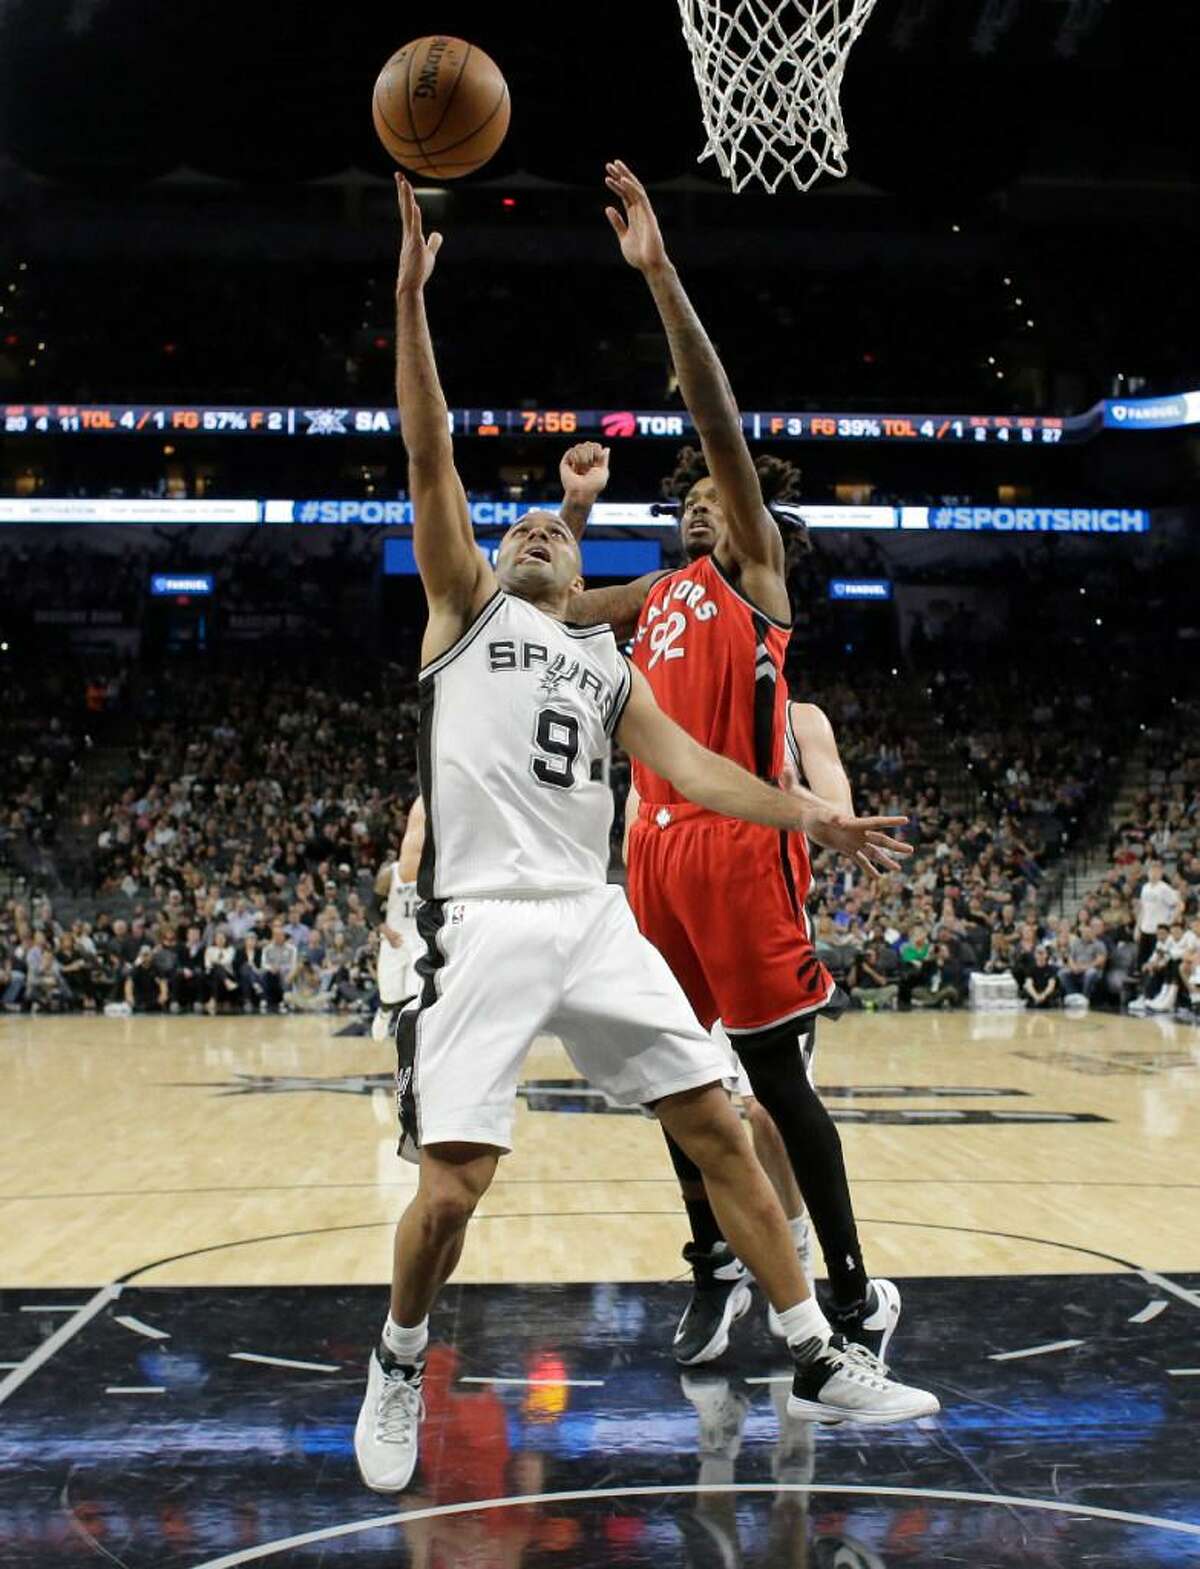 San Antonio Spurs guard Tony Parker shoots in the paint as Toronto Raptors center Lucas Nogueira defends during the Spurs’ lopsided win Tuesday at the AT&T Center. The Spurs are scoring less from the paint this year than in previous seasons, by design.